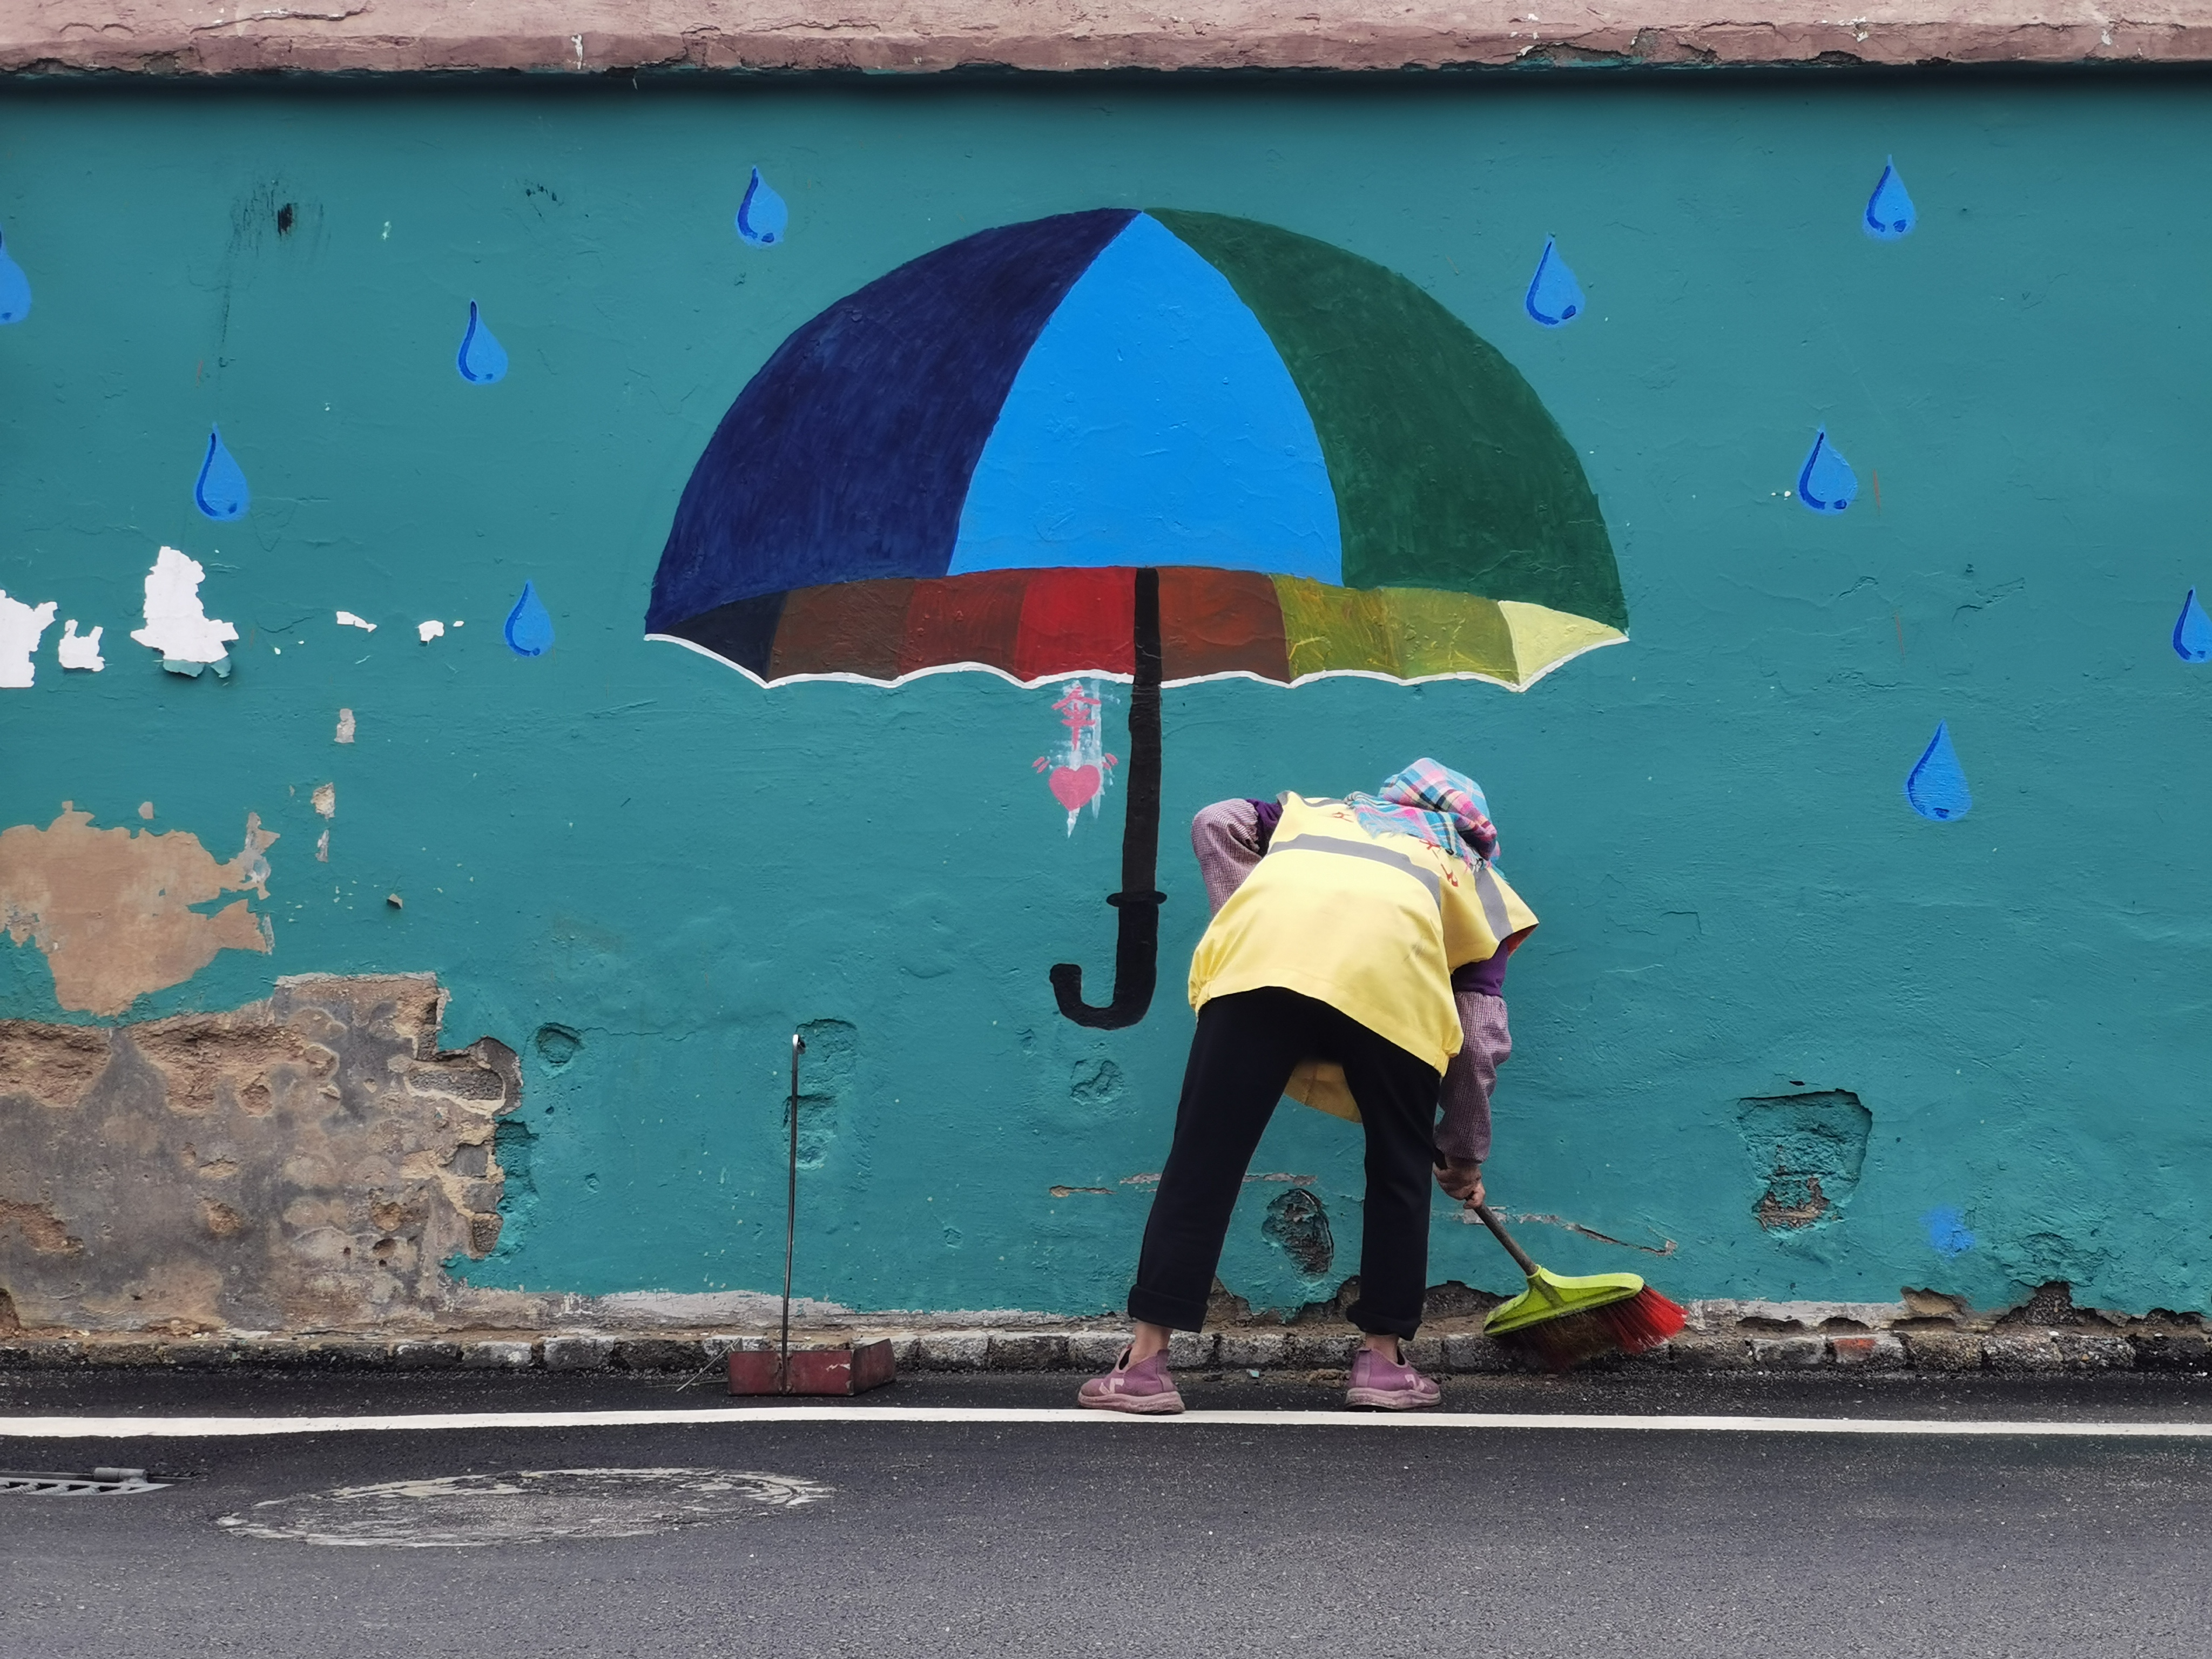 The Chinese winner 'Love in a Small Town' is an amusing juxtaposition of wall art and street cleaning. /Hongwei Zhang